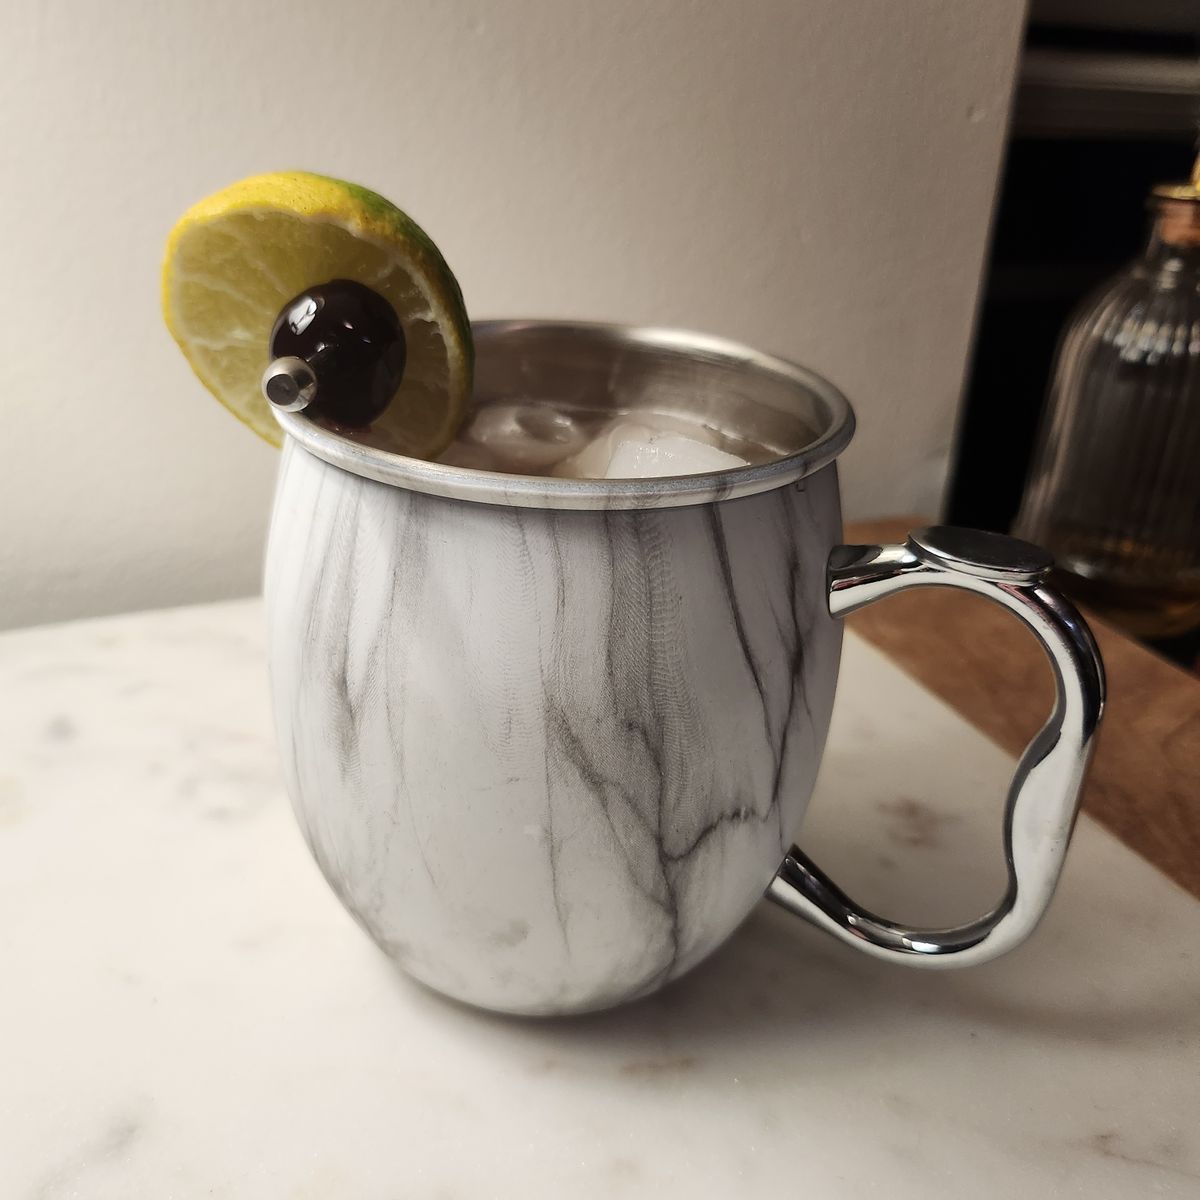 My take on a Pisco Punch, this is a fun version of a Moscow Mule made with Pisco and cherry ginger beer